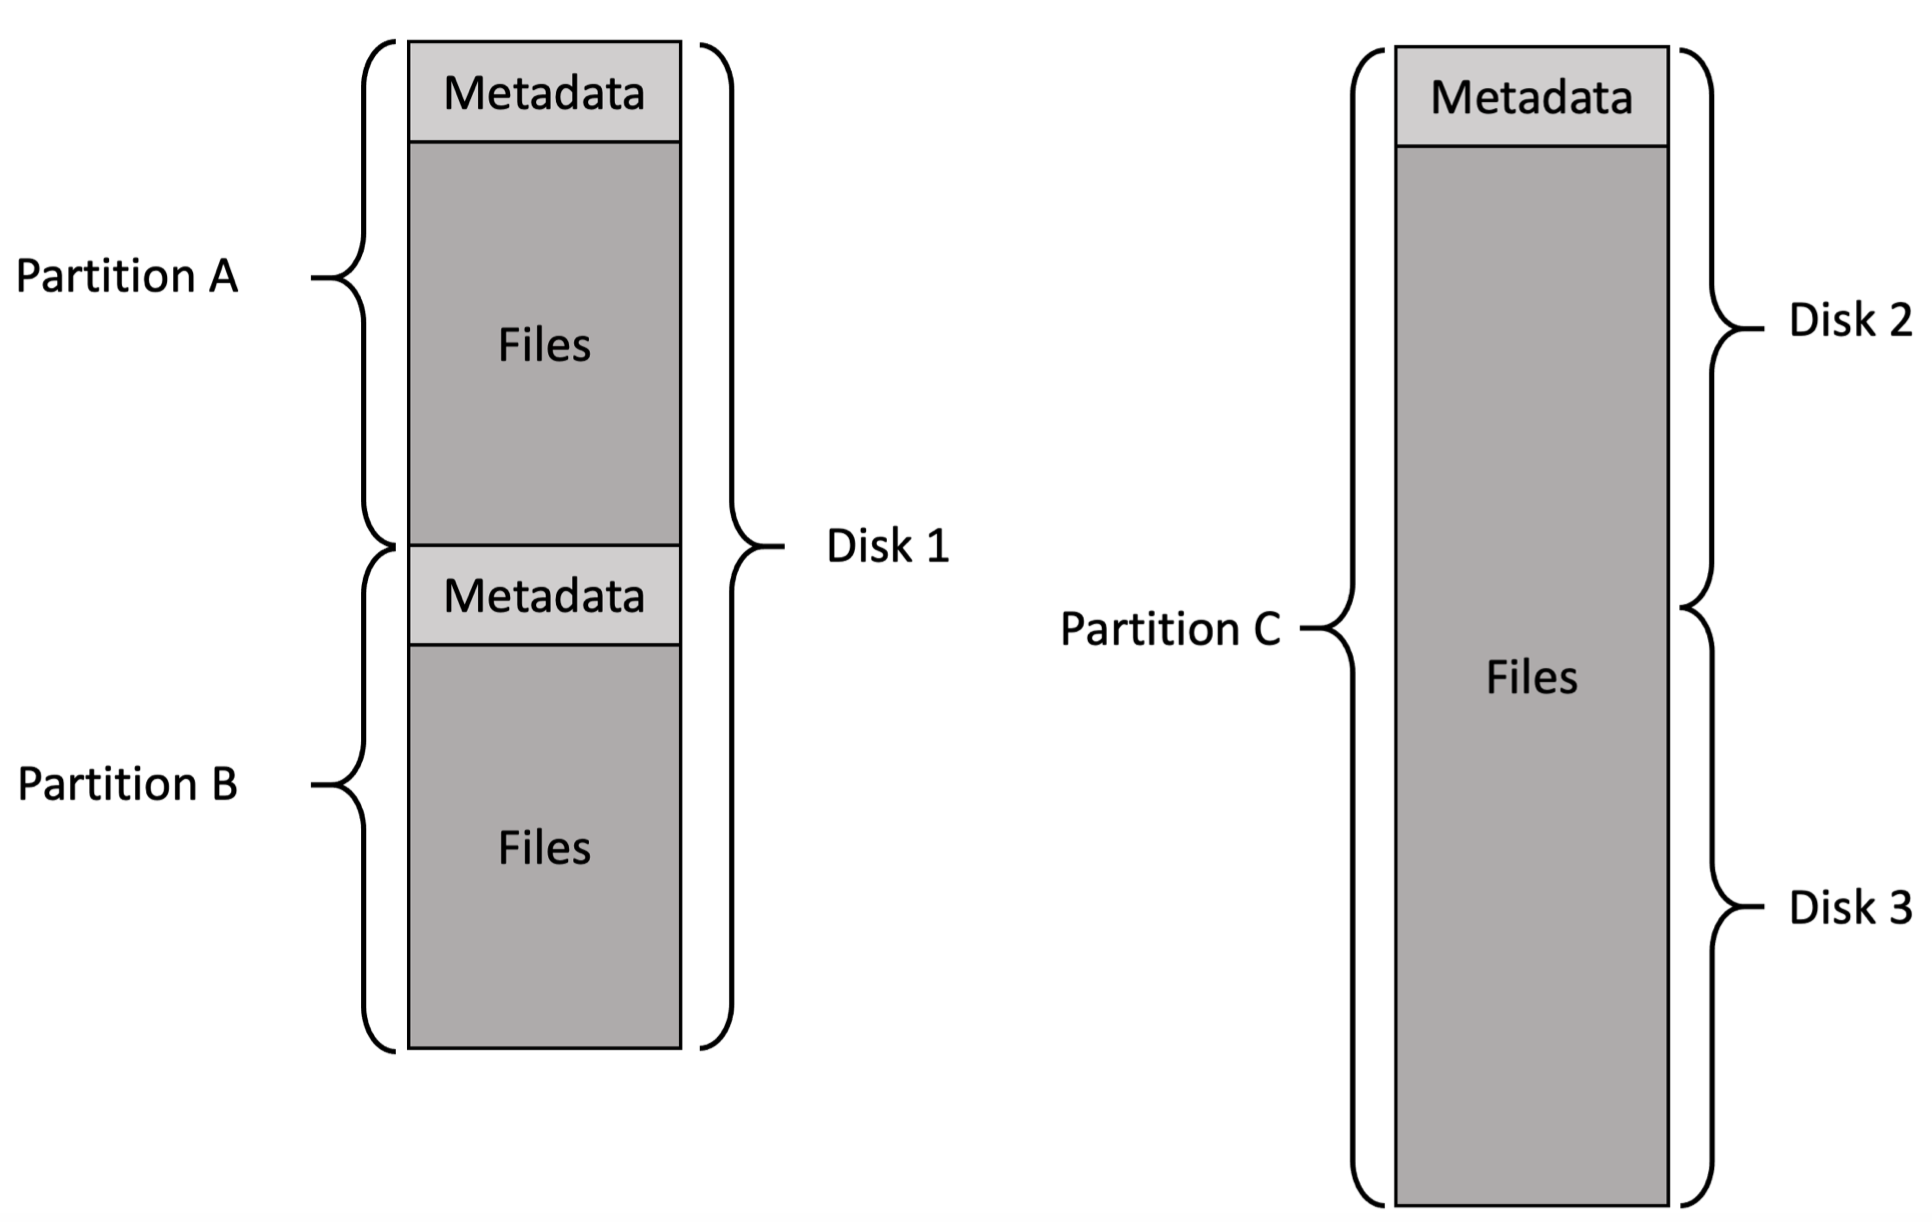 File System layout